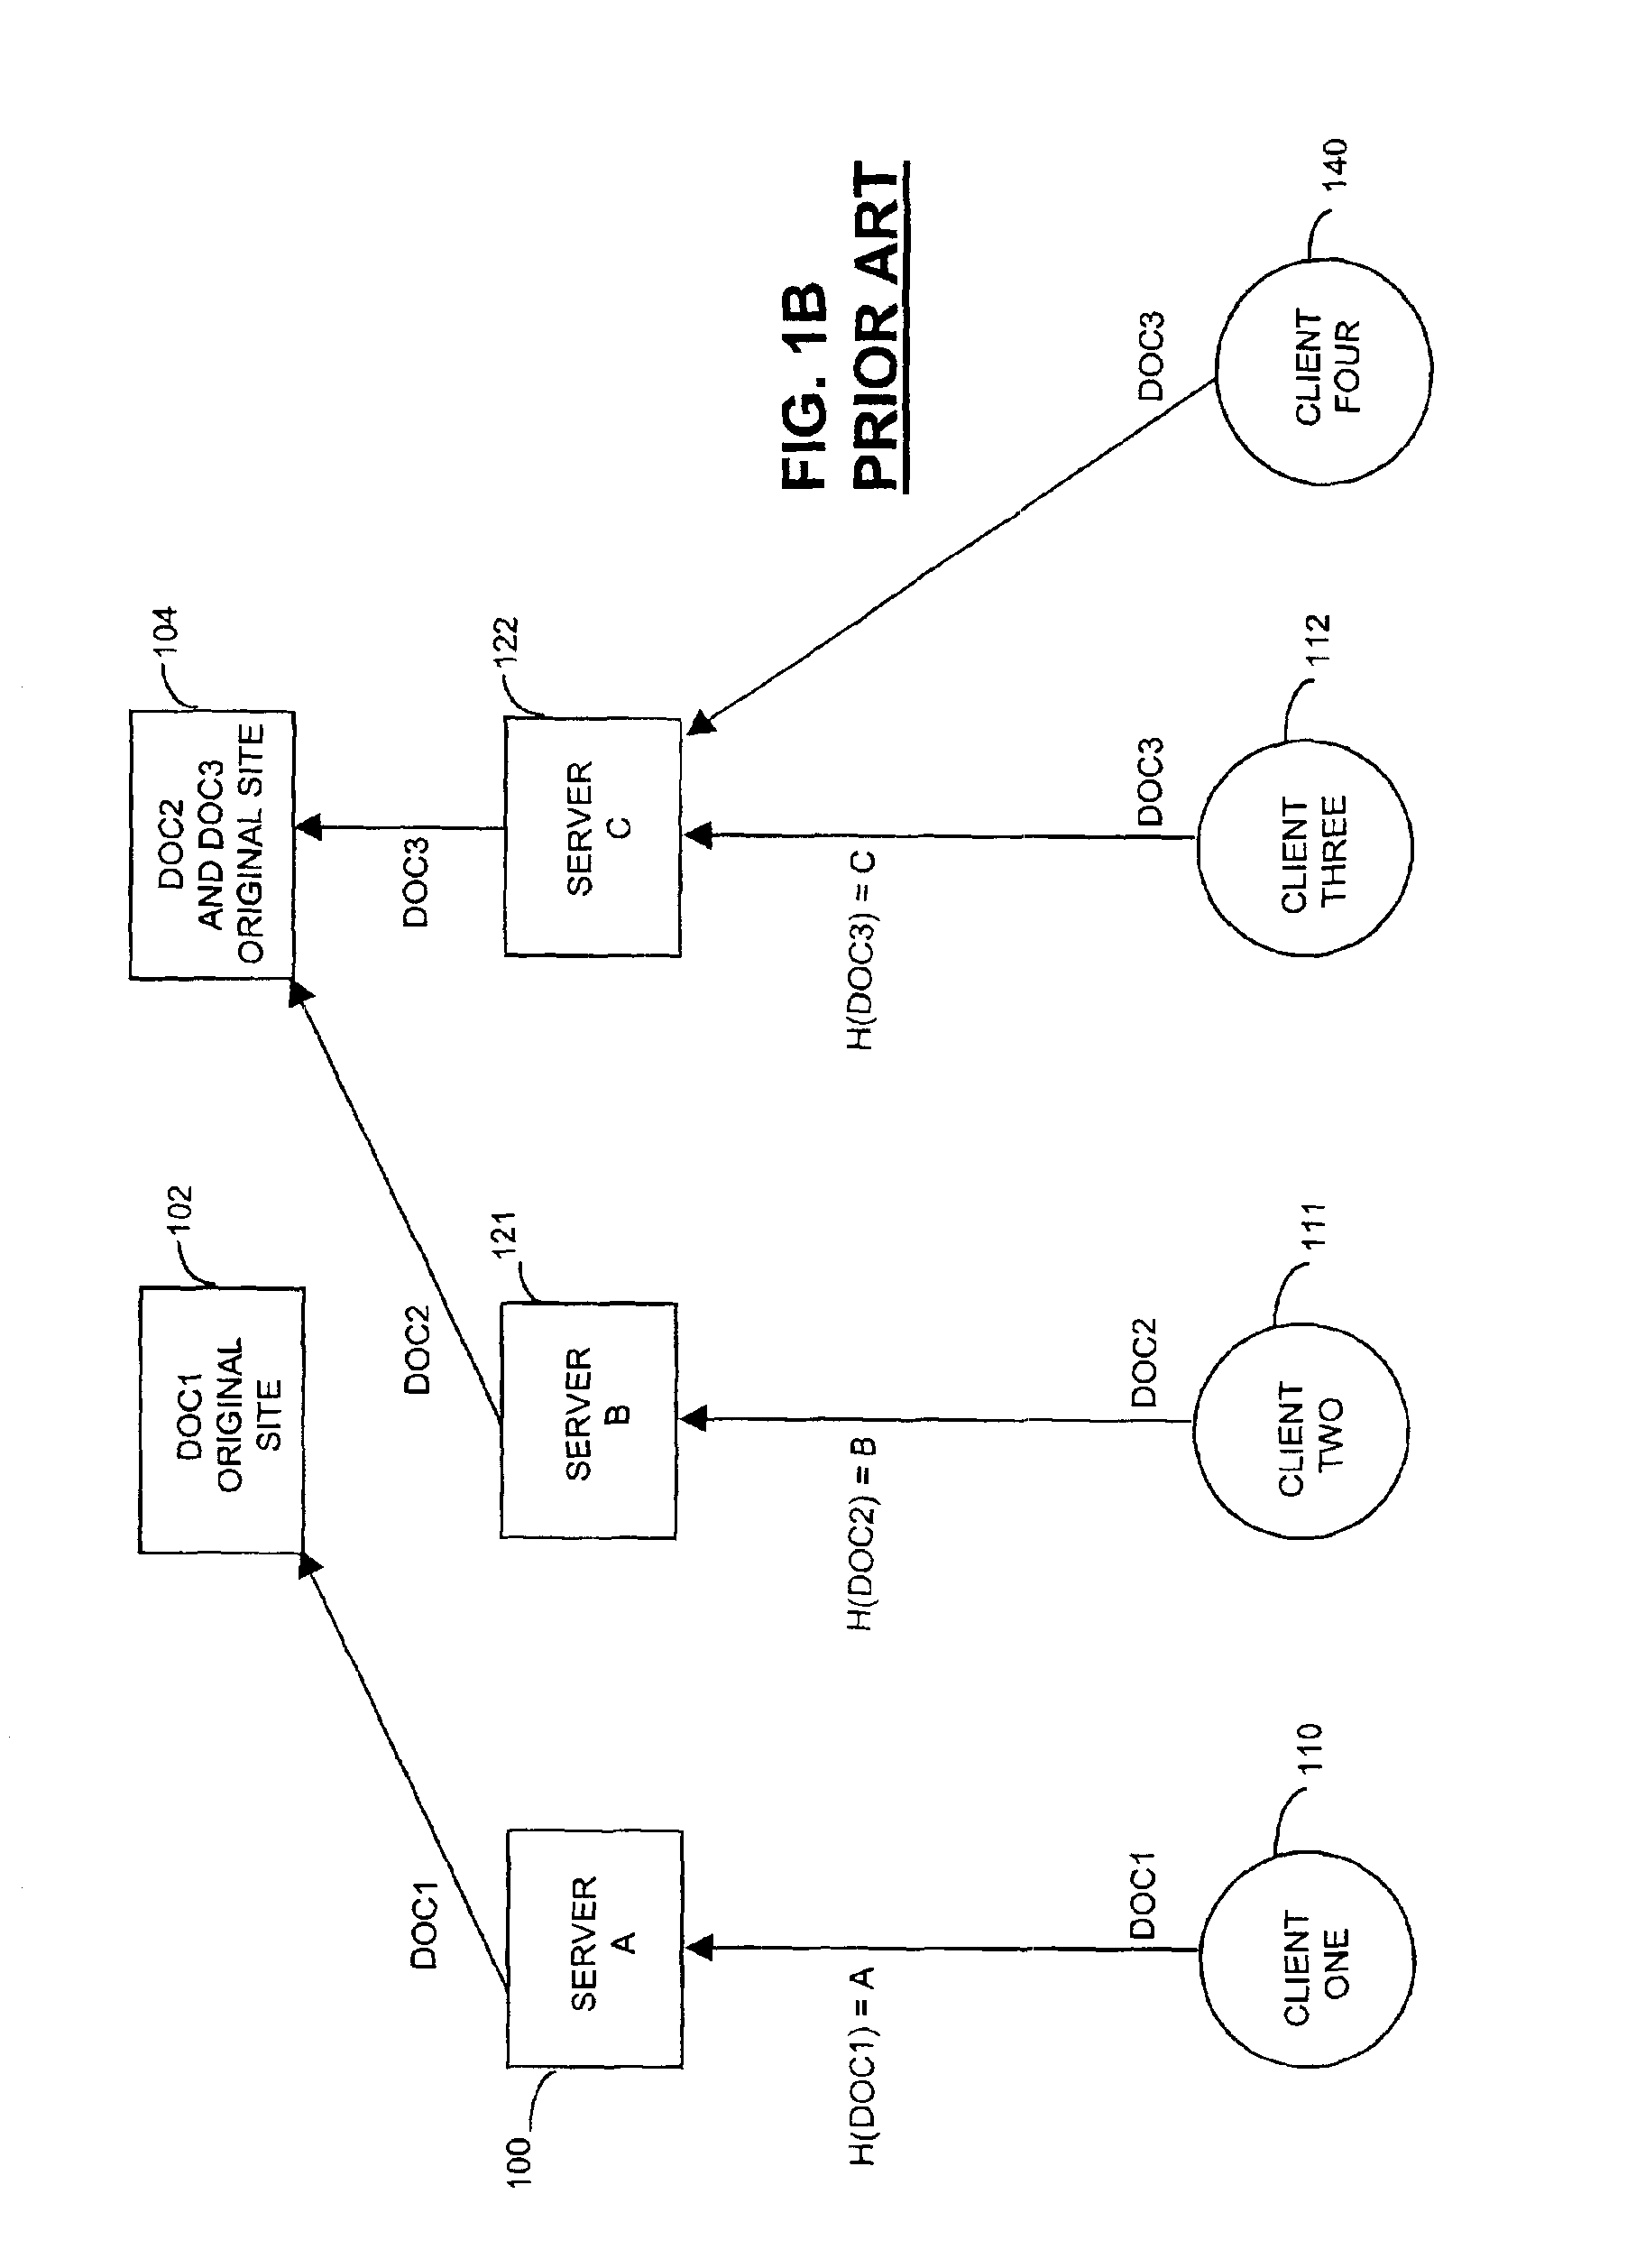 Method and apparatus for distributing requests among a plurality of resources